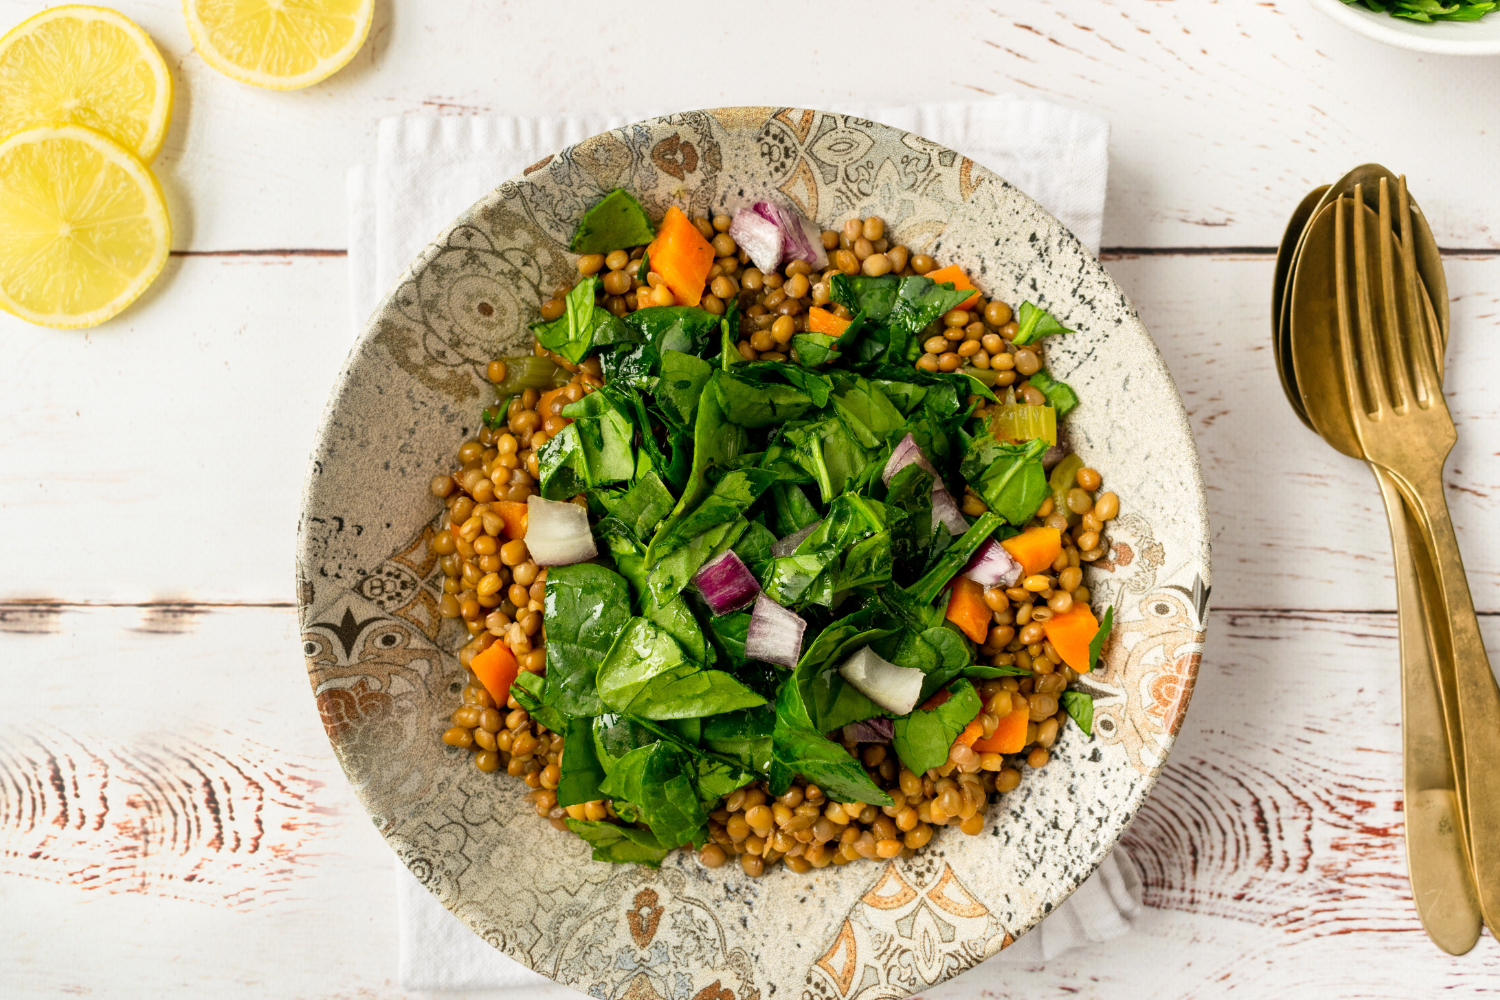 Spinach and Lentils